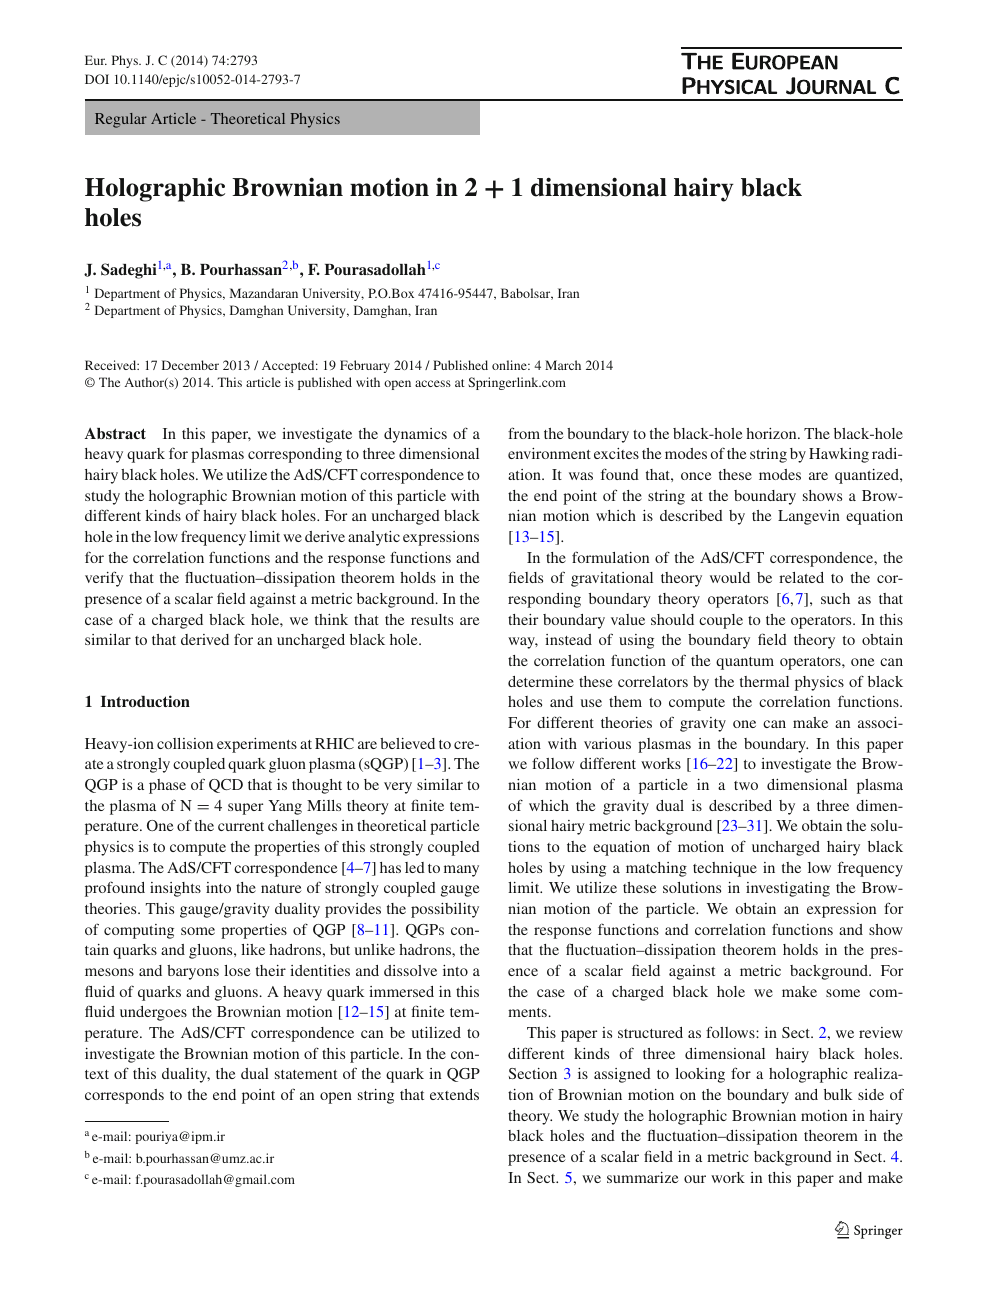 Holographic Brownian Motion In 2 1 2 1 Dimensional Hairy Black Holes Topic Of Research Paper In Physical Sciences Download Scholarly Article Pdf And Read For Free On Cyberleninka Open Science Hub